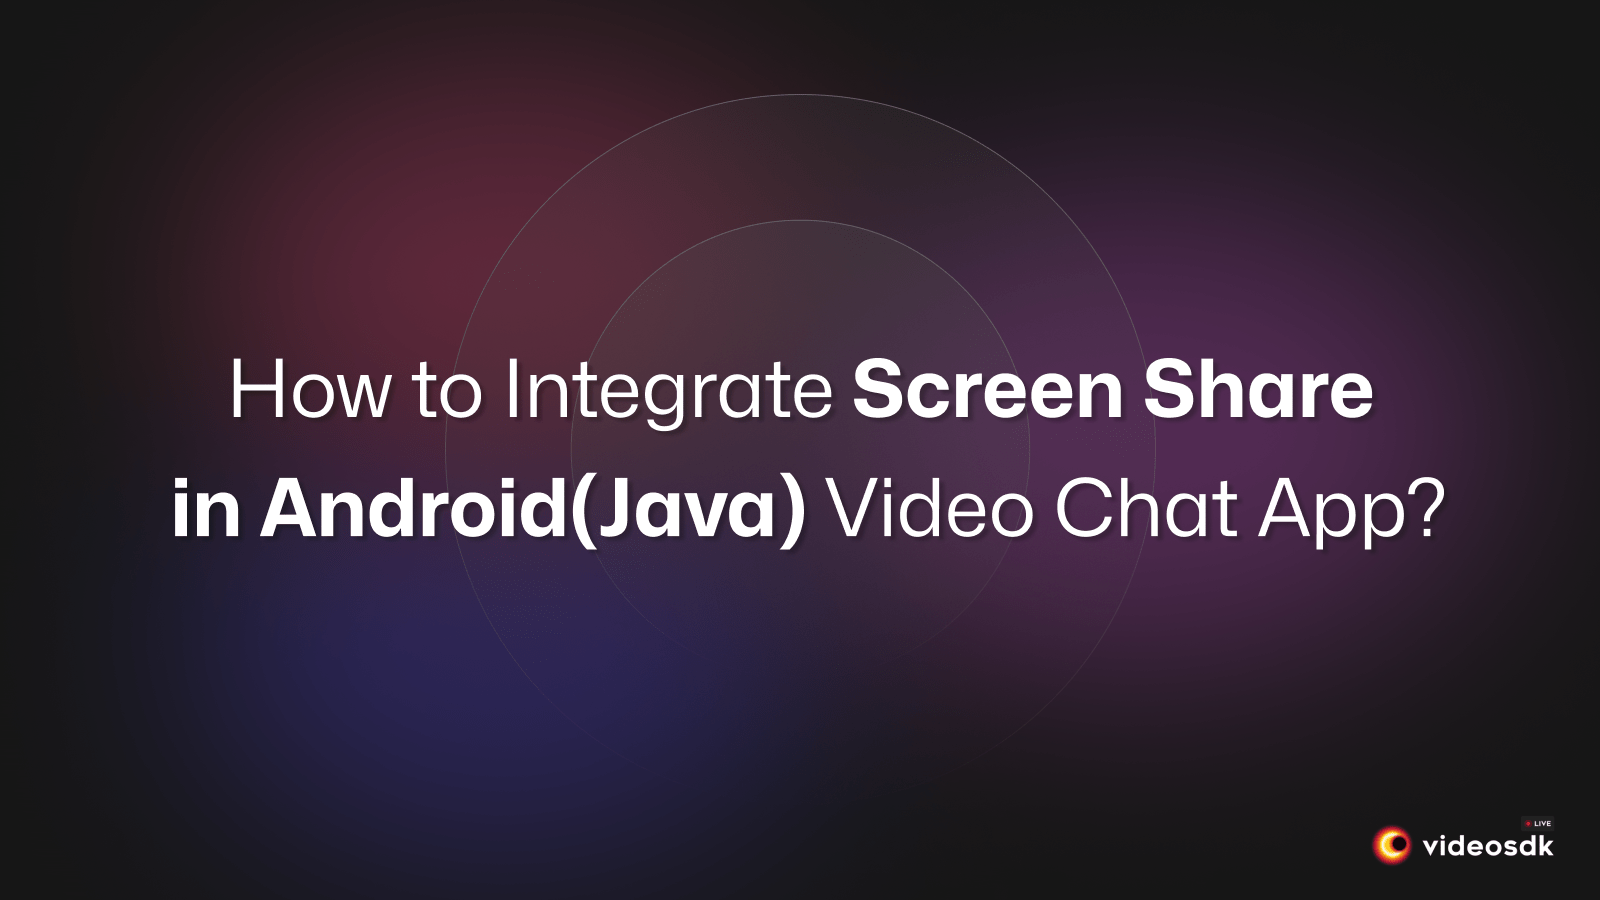 How to Integrate Screen Share in Android(Java) Video Chat App?